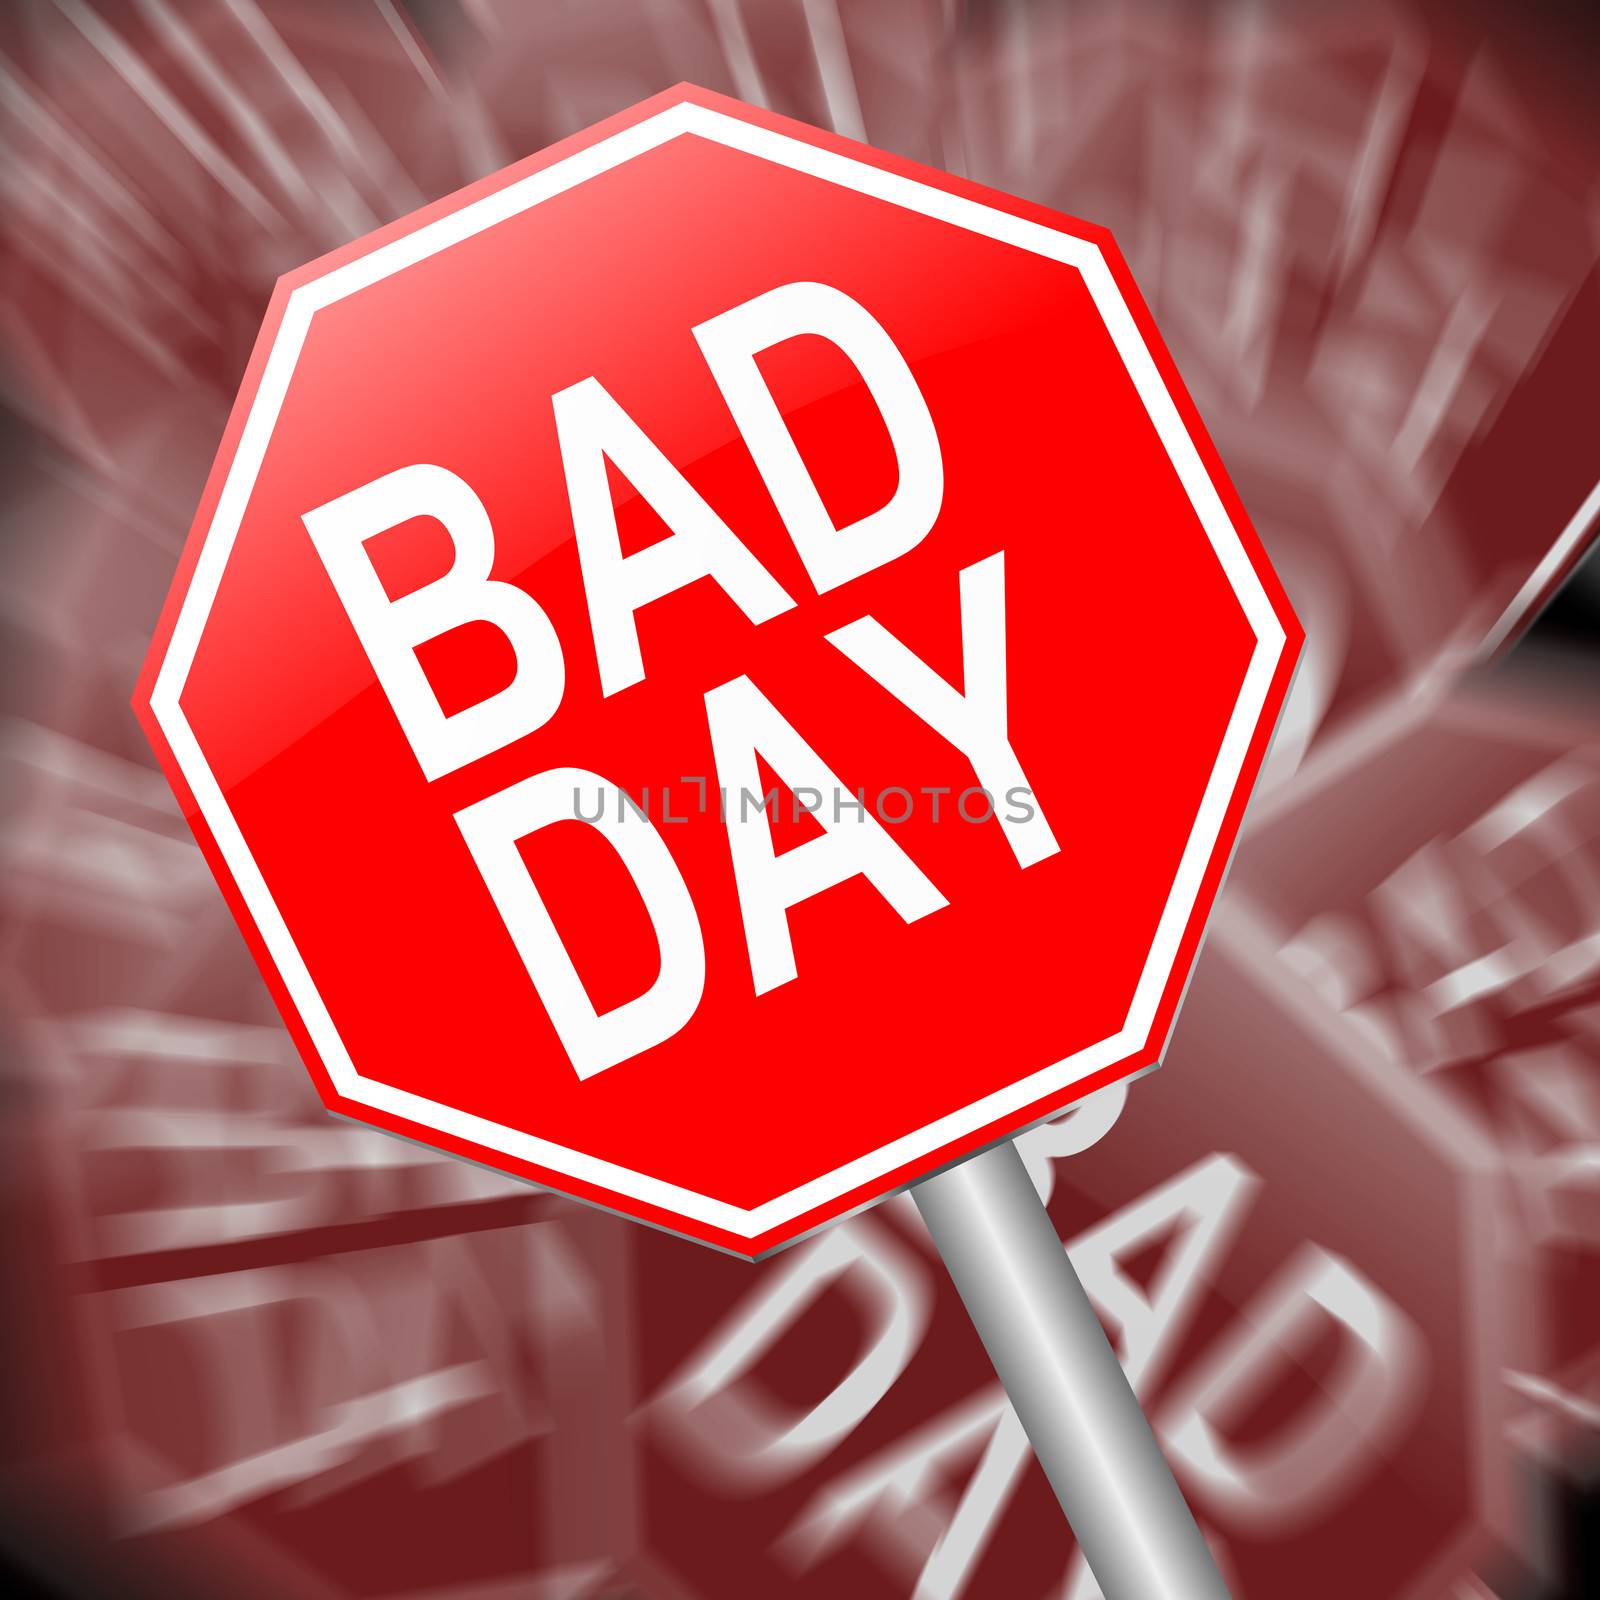 Illustration depicting a sign with a bad day concept.